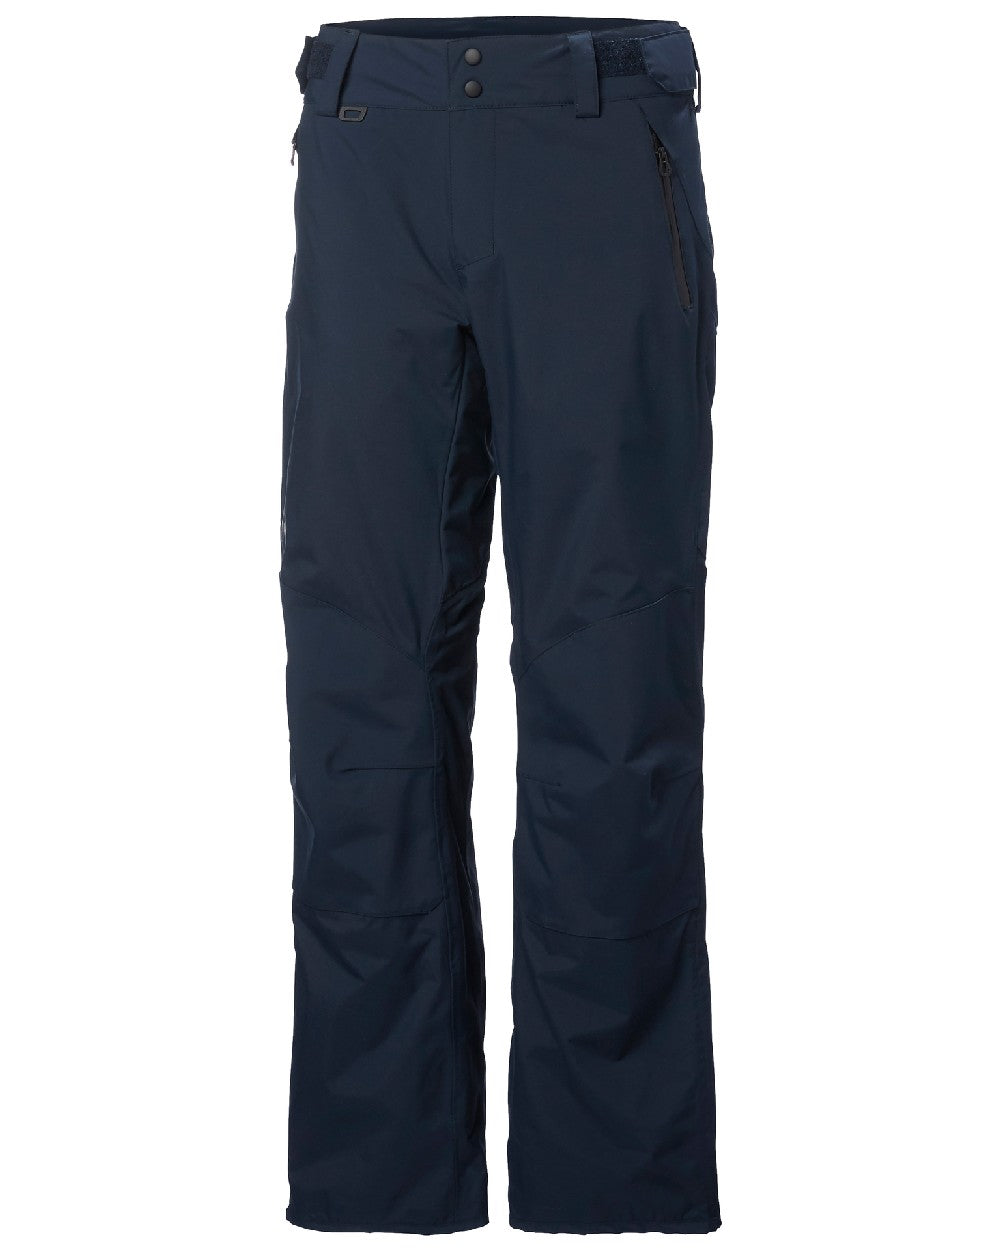 Navy coloured Helly Hansen Womens HP Foil Pants on white background 